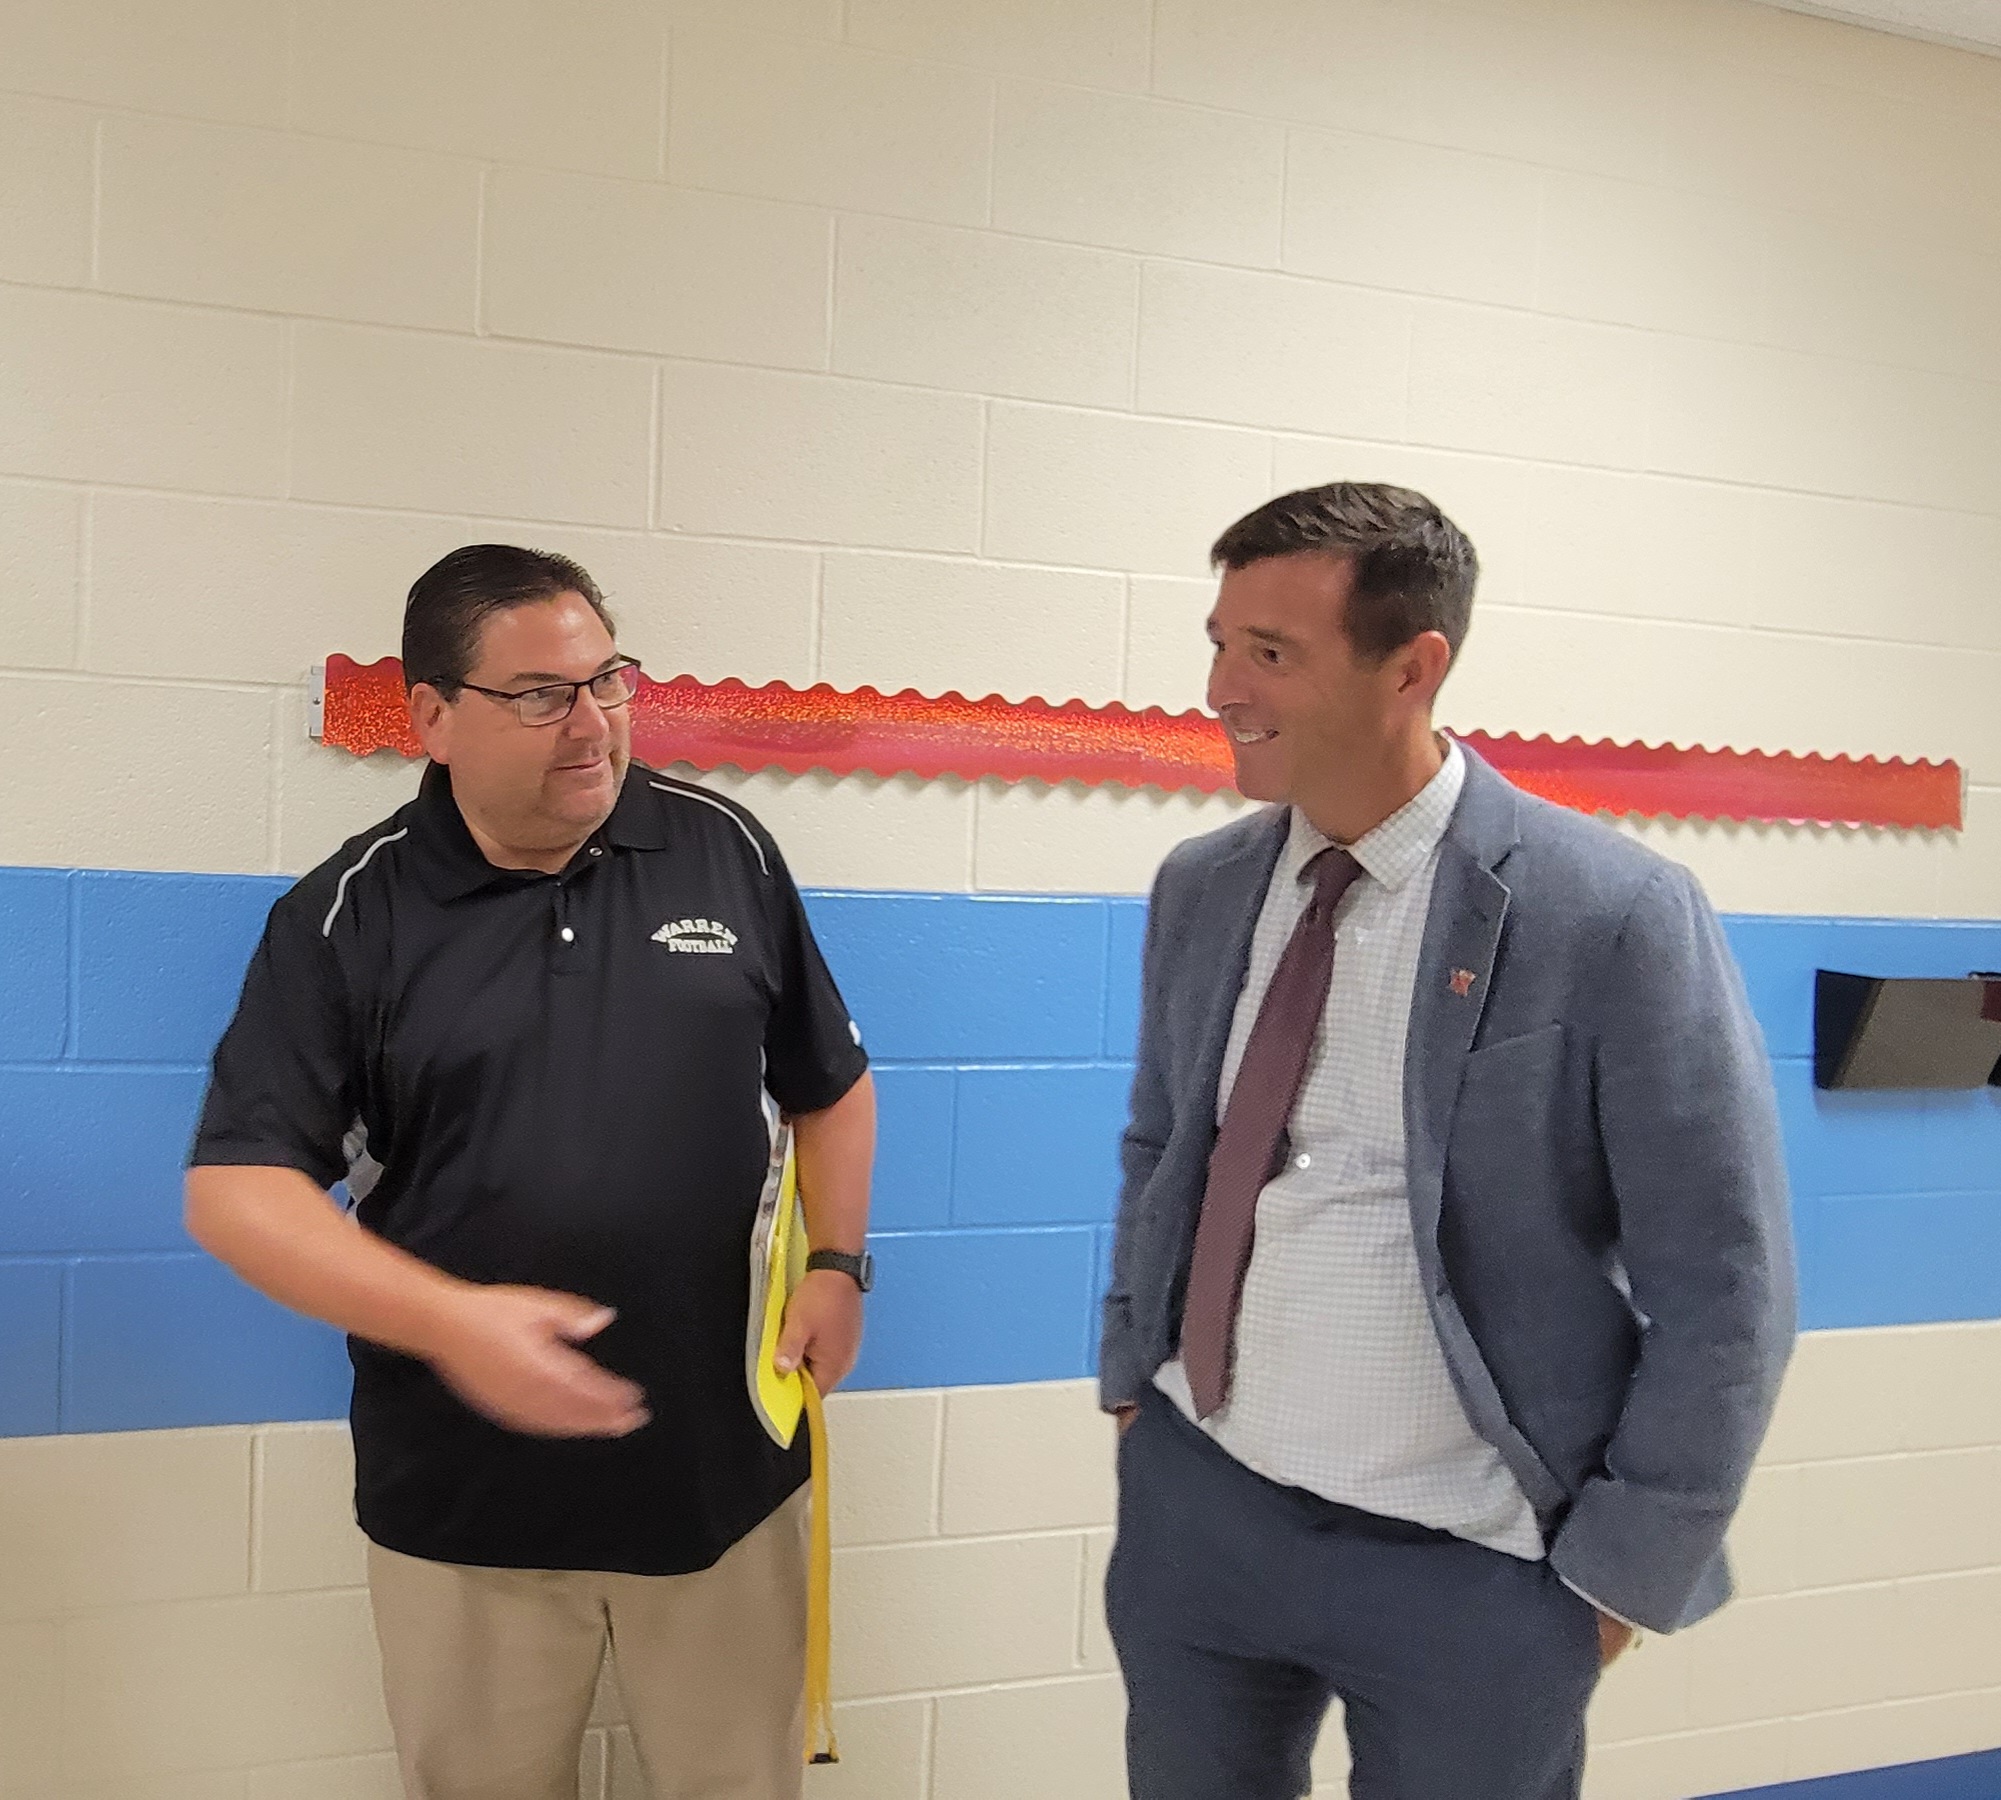 State Superintendent sees ‘great things happening’ in WCS